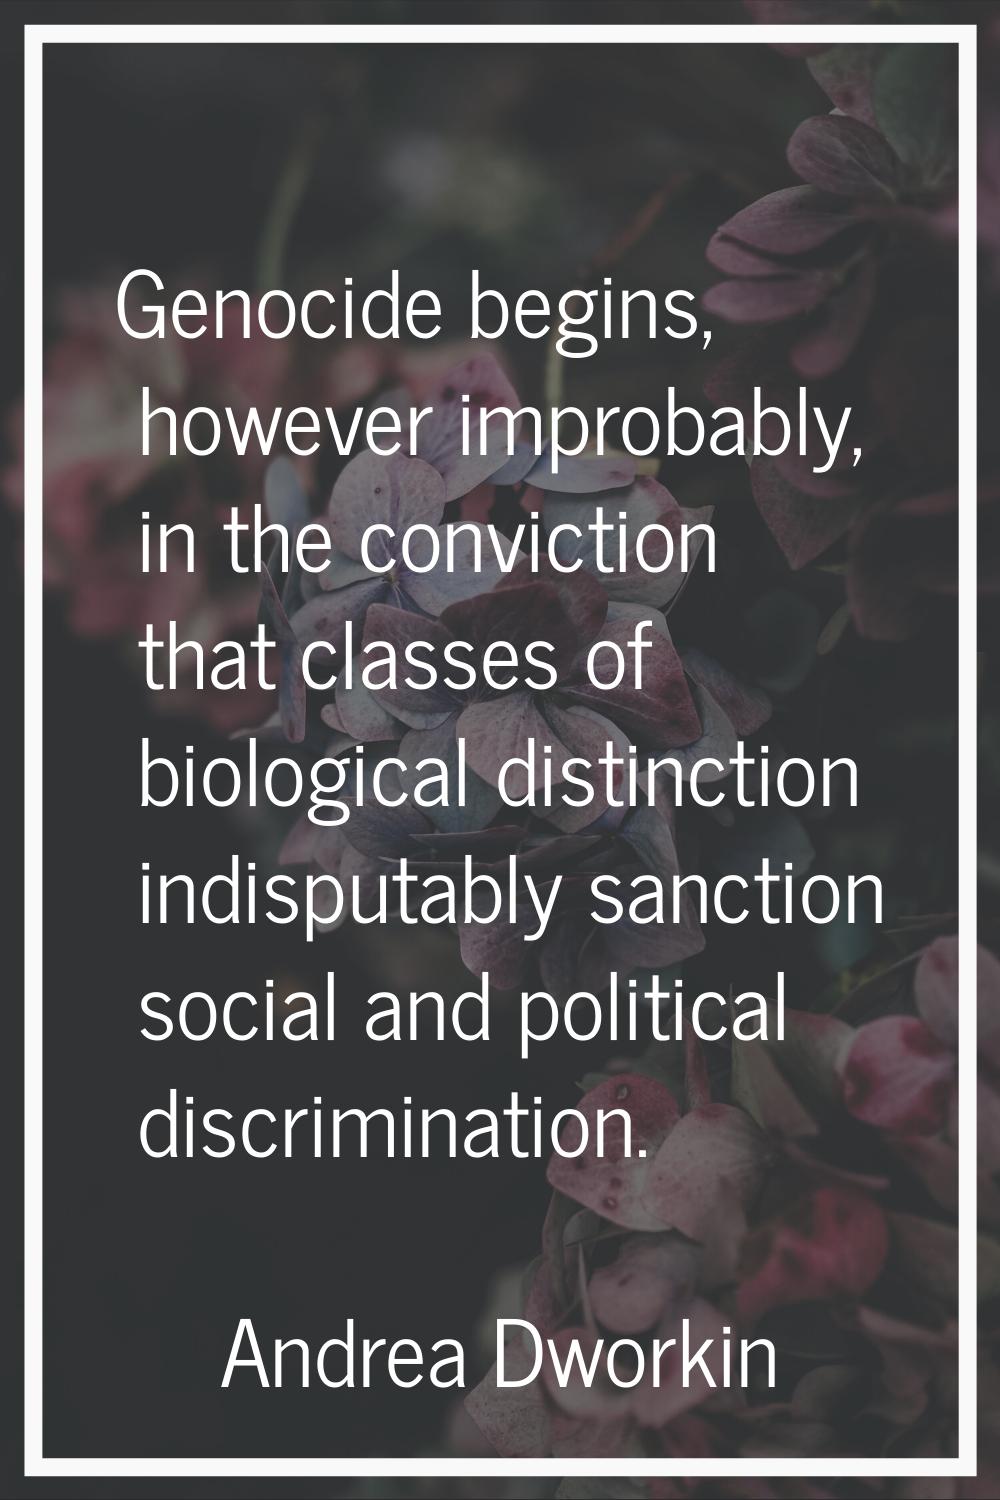 Genocide begins, however improbably, in the conviction that classes of biological distinction indis